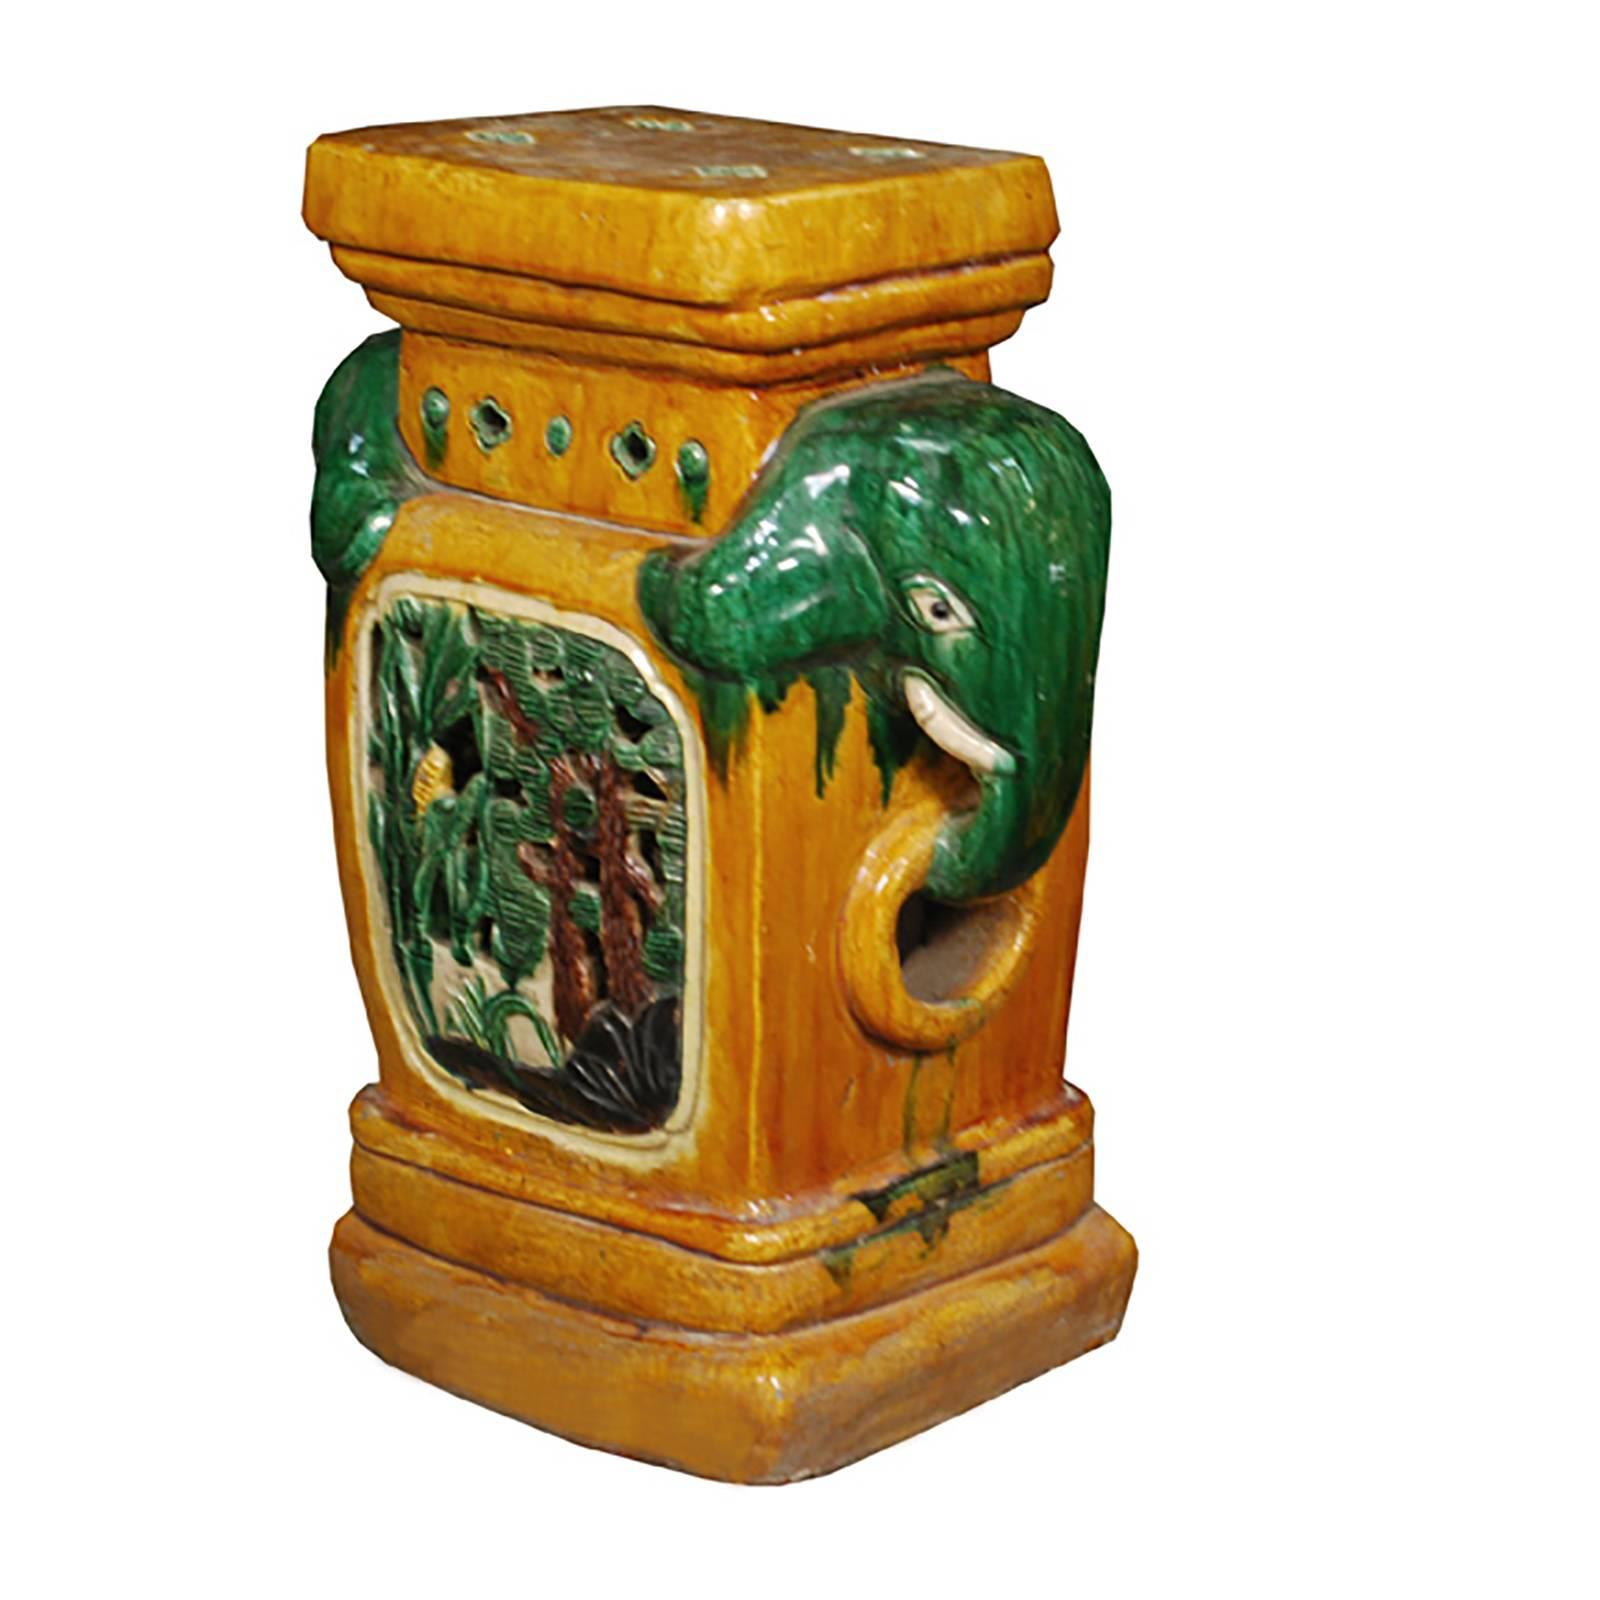 Symbols of strength and wisdom, a pair of emerald green elephants are prominent features of this lushly glazed ceramic stool. Also embellished with medallions of forest scenes and incised and colored small decorations, the stool was made around 1900